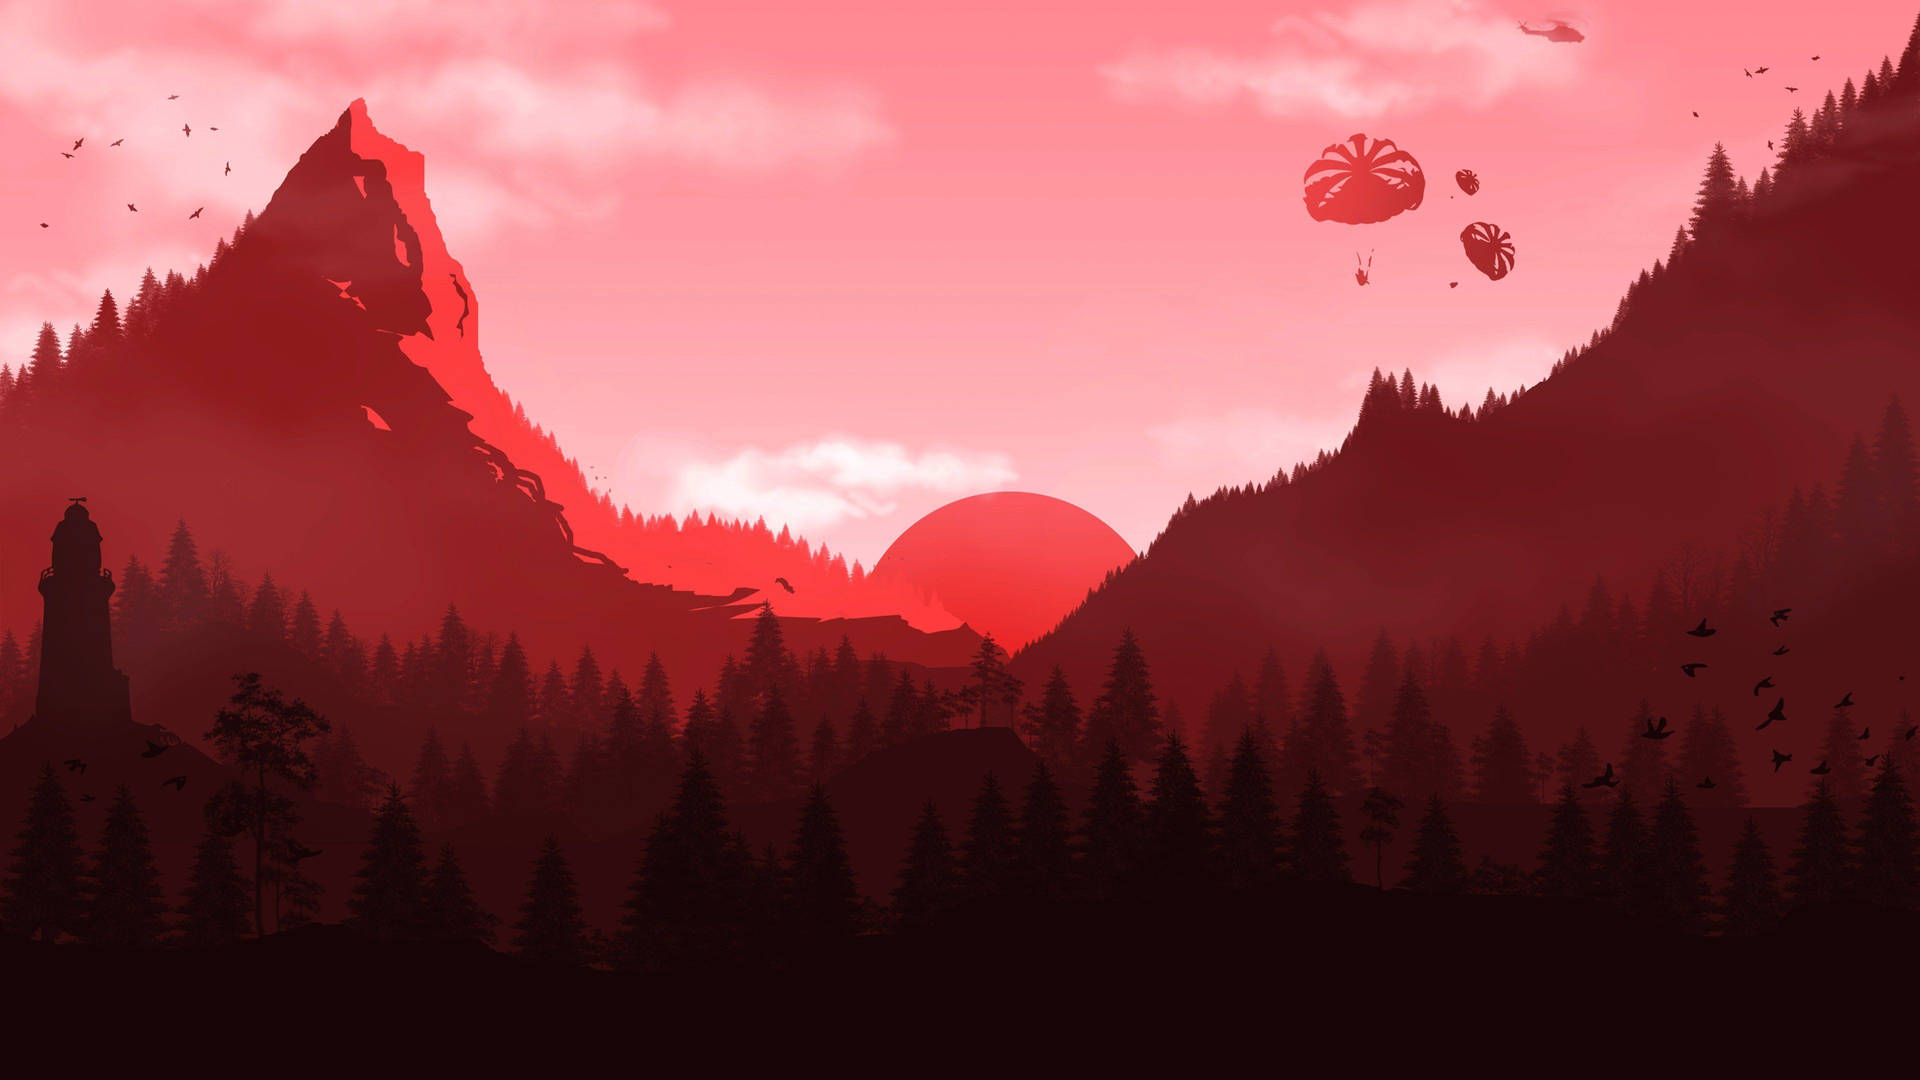 Red Mountain With Parachutes Background